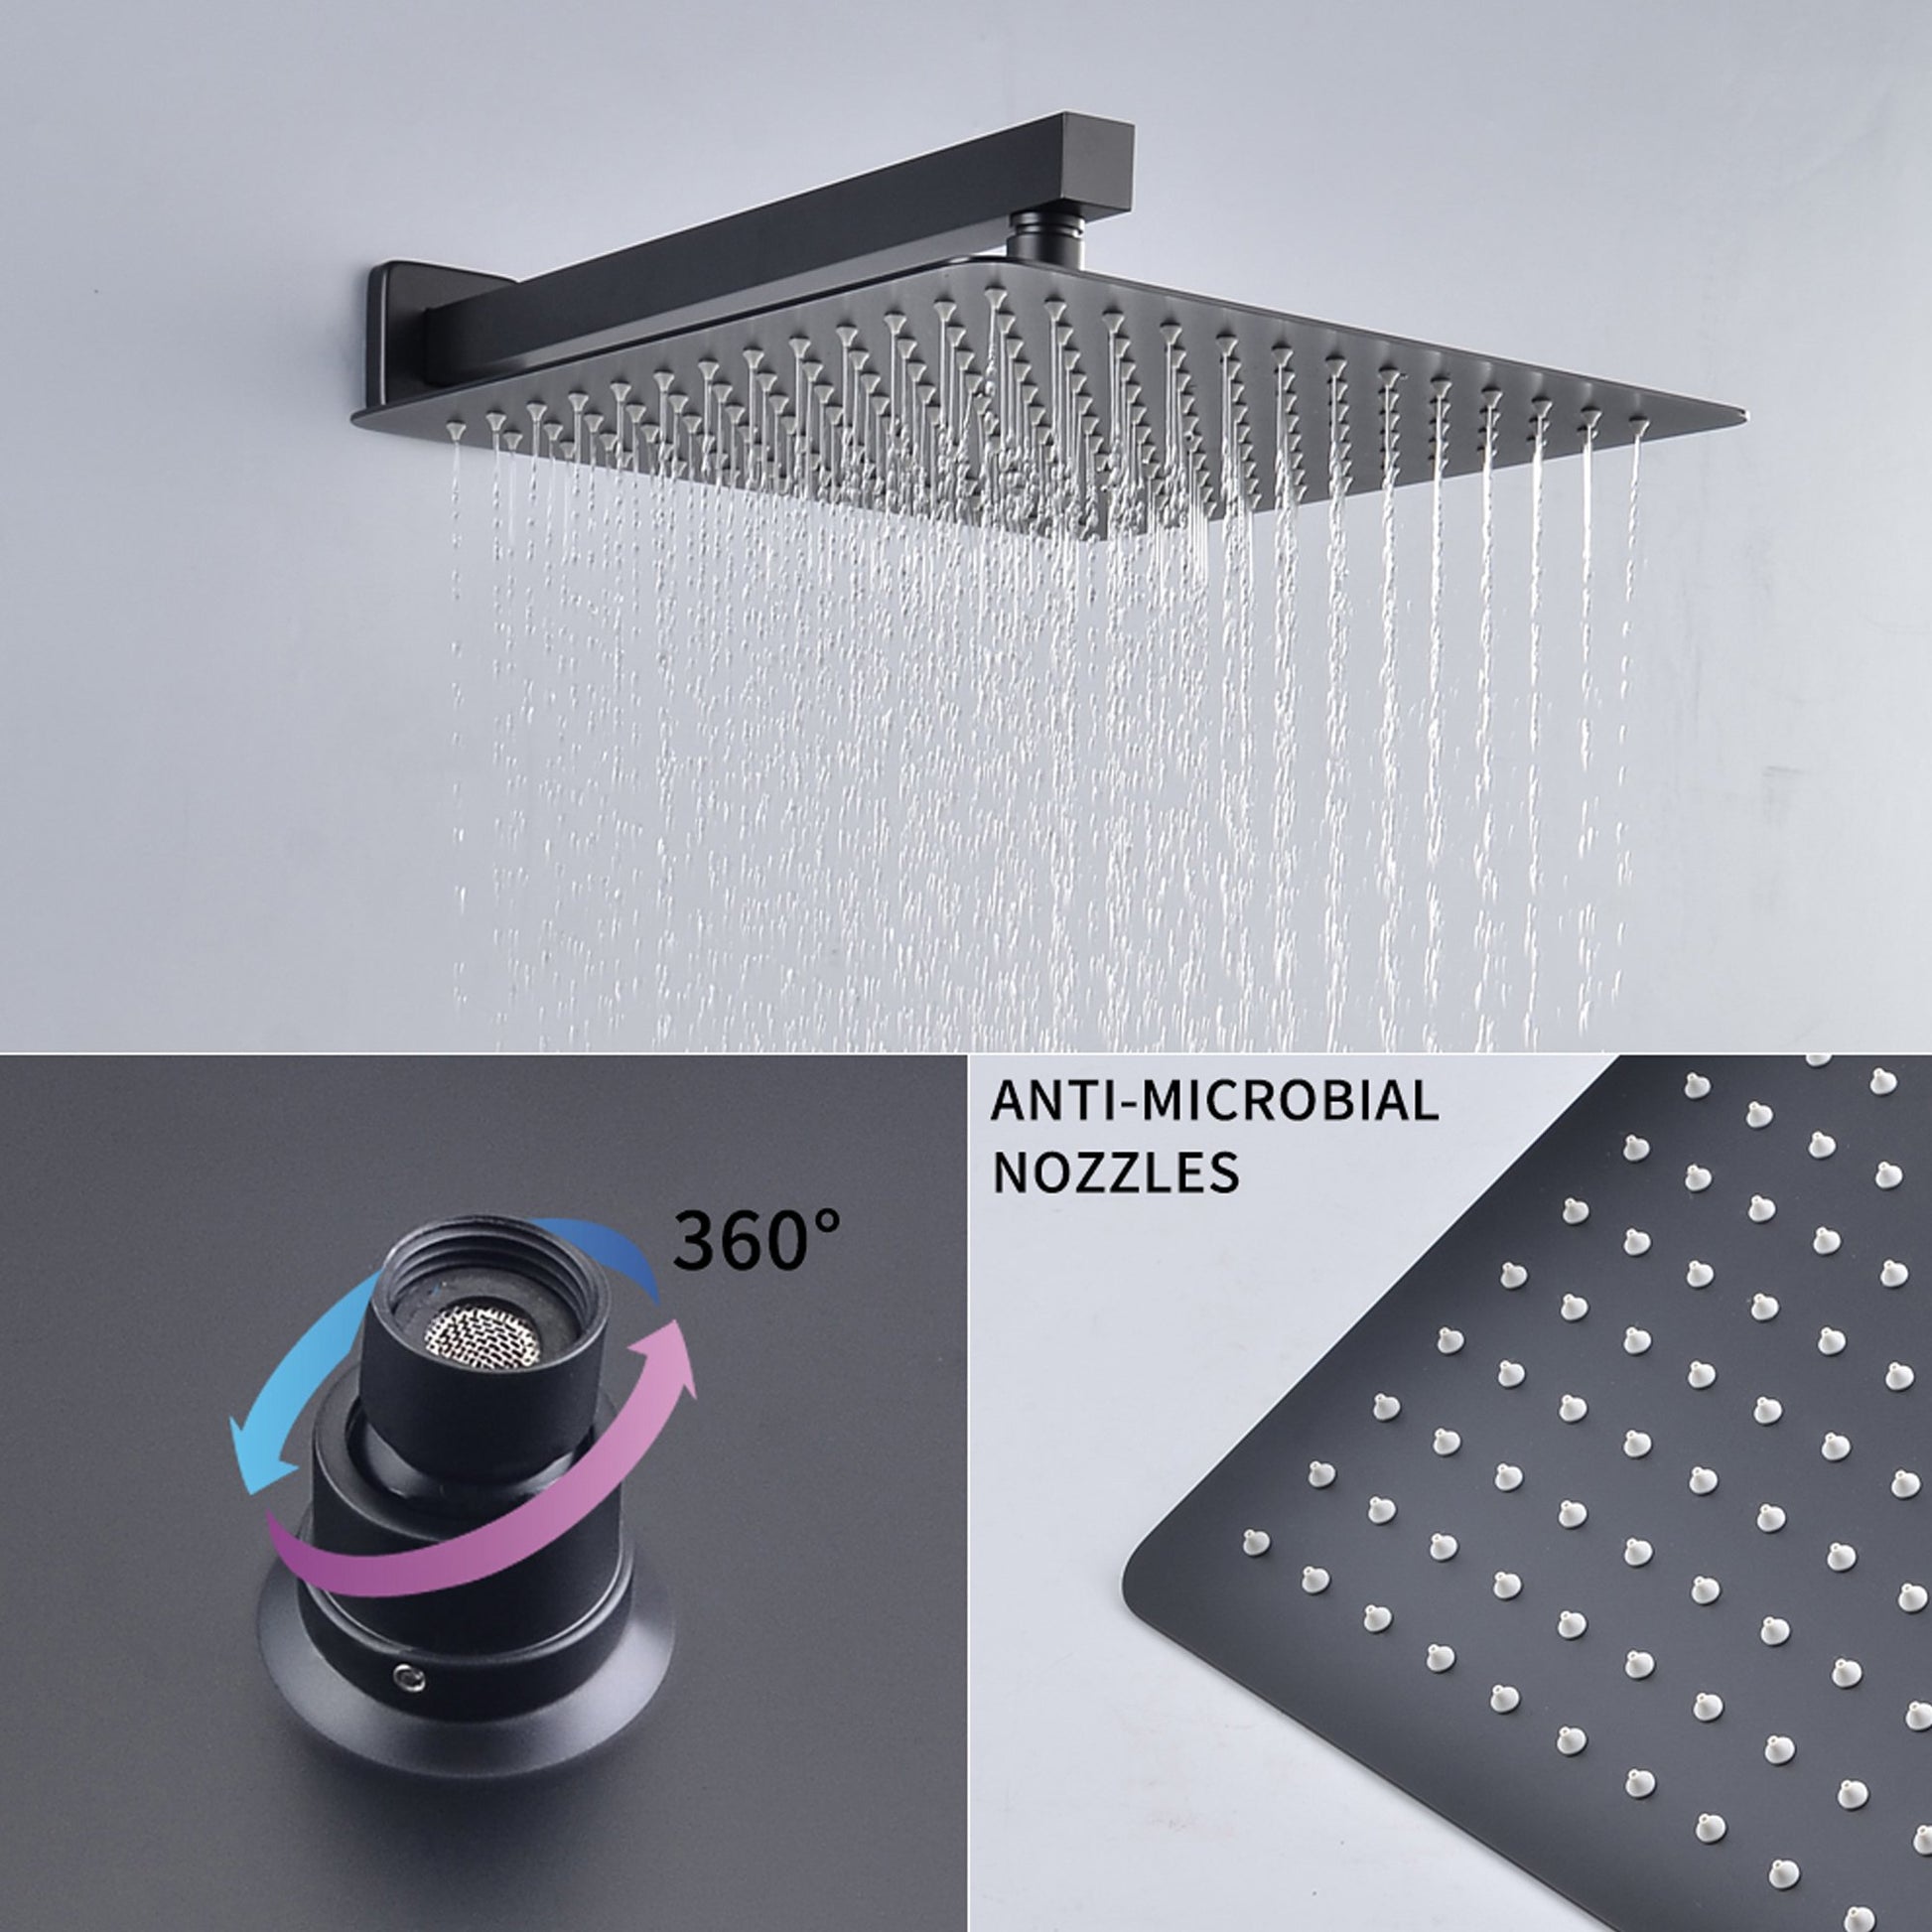 1-Spray Patterns with 2.66 GPM 10 in. Wall Mount Dual Shower Heads with Rough-In Valve Body and Trim in Matte Black - Alipuinc